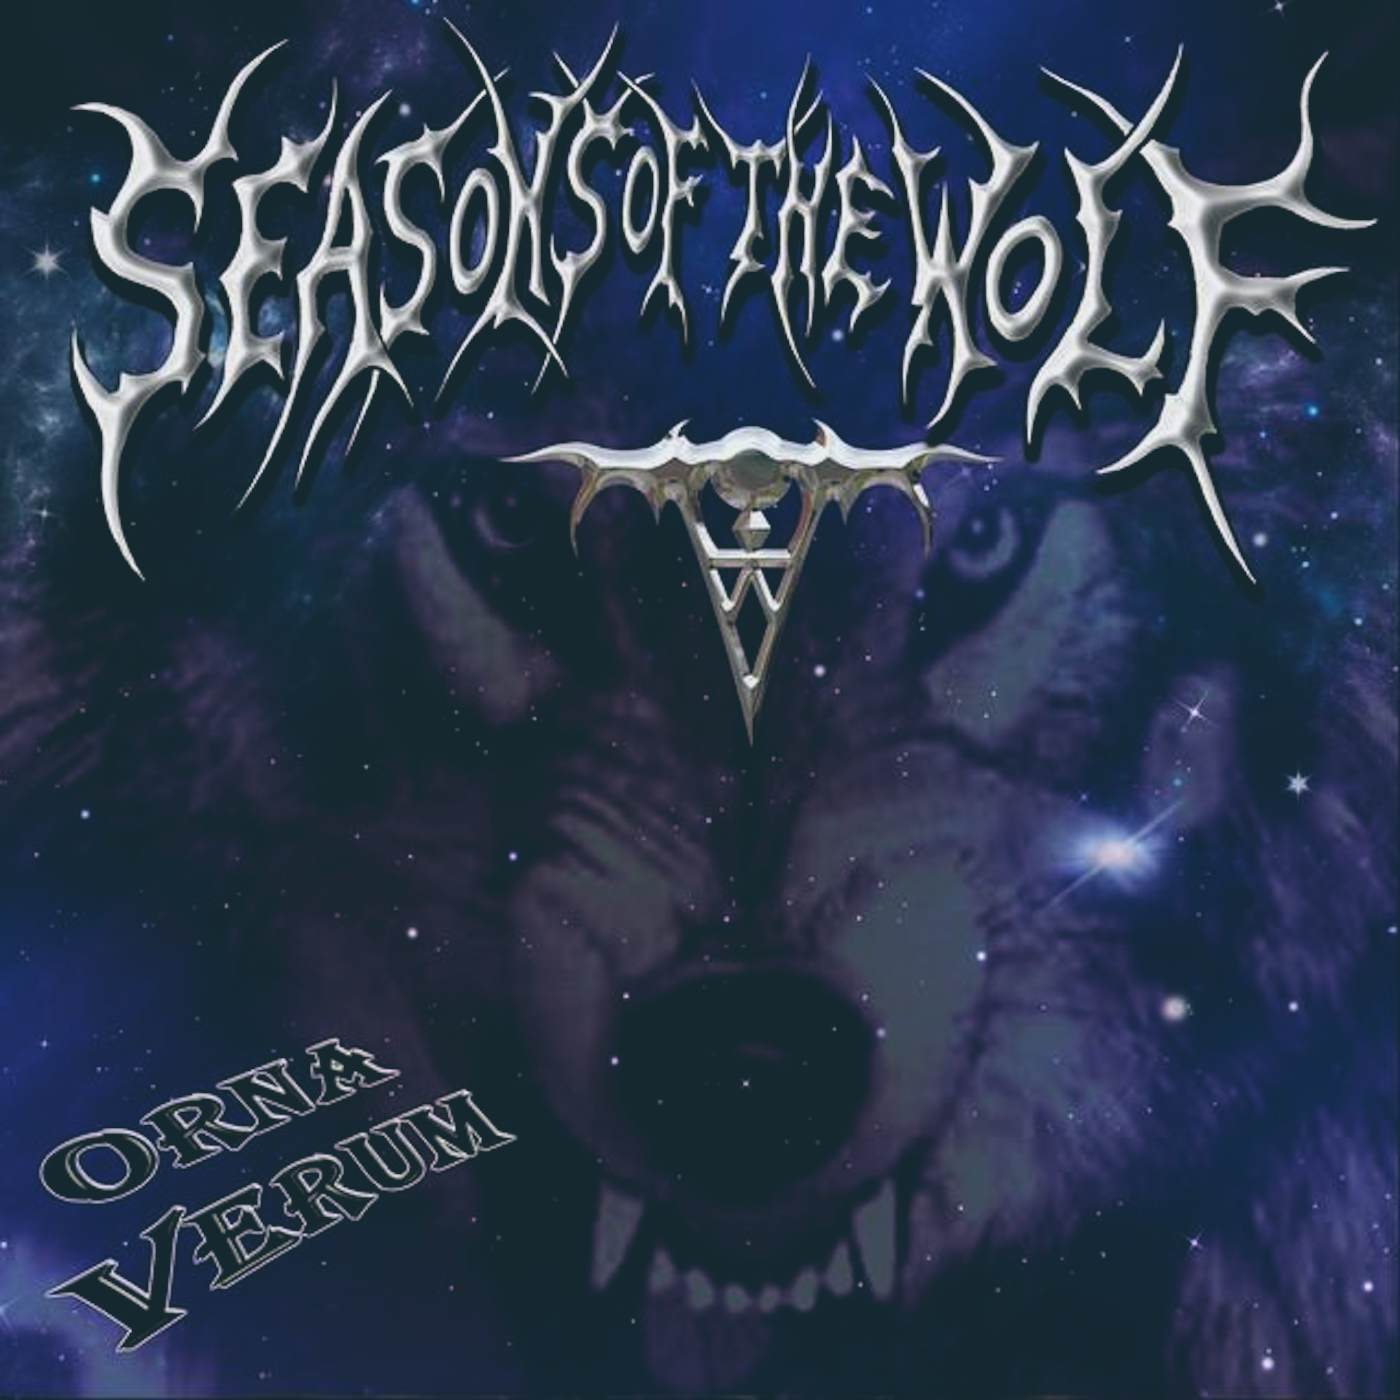 Seasons of the Wolf